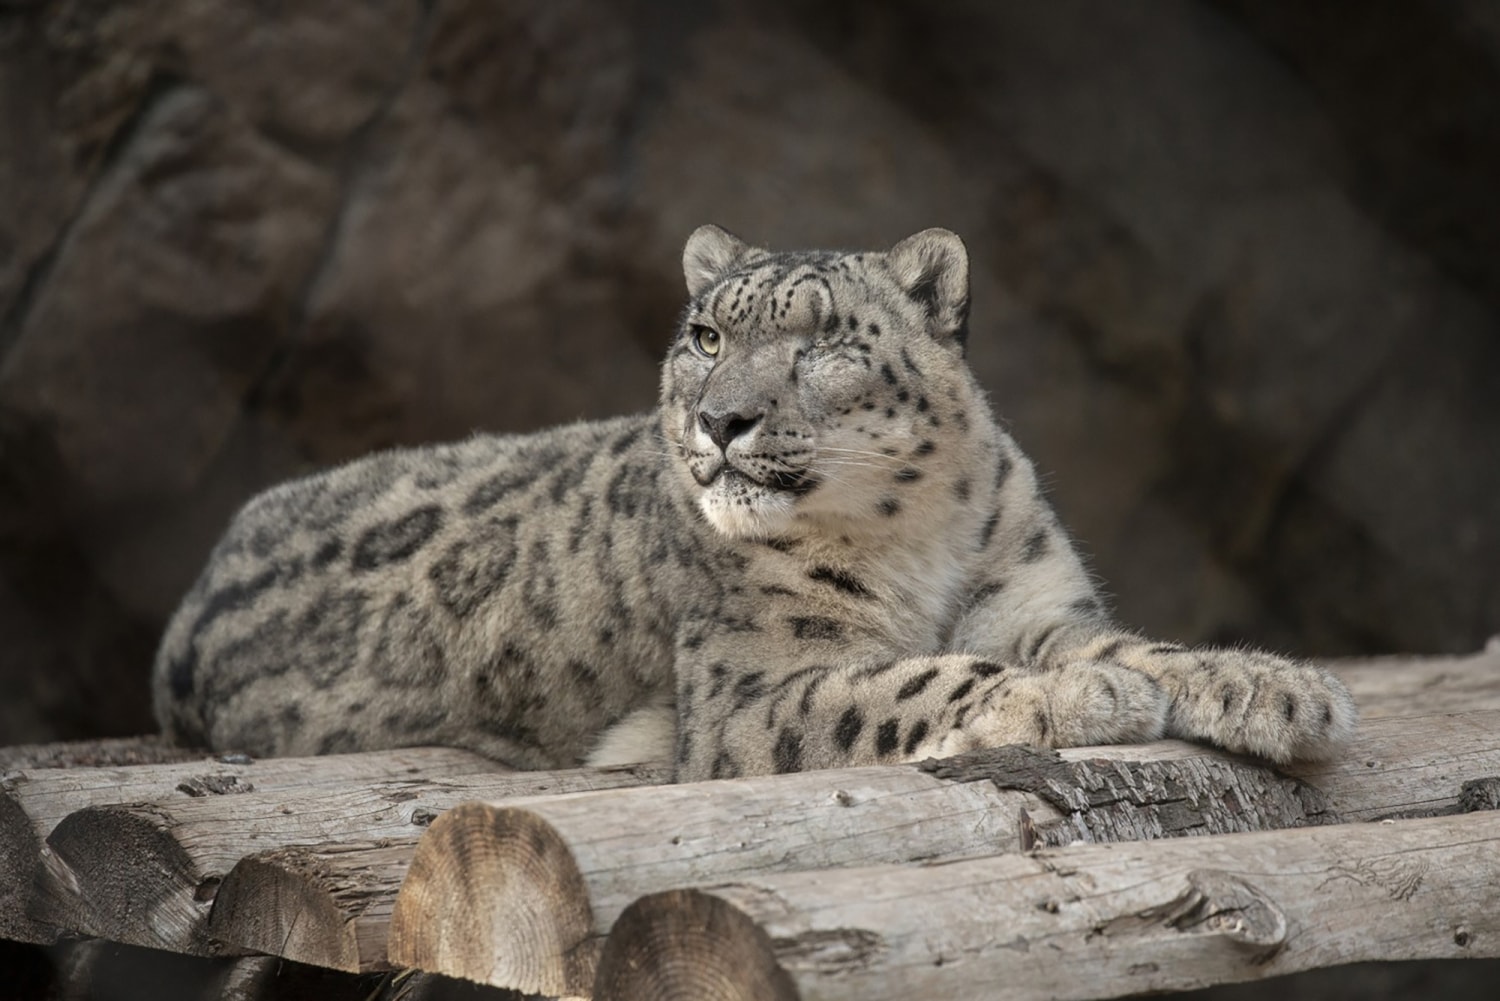 Snow leopard at Illinois zoo dies after contracting Covid-19, Illinois